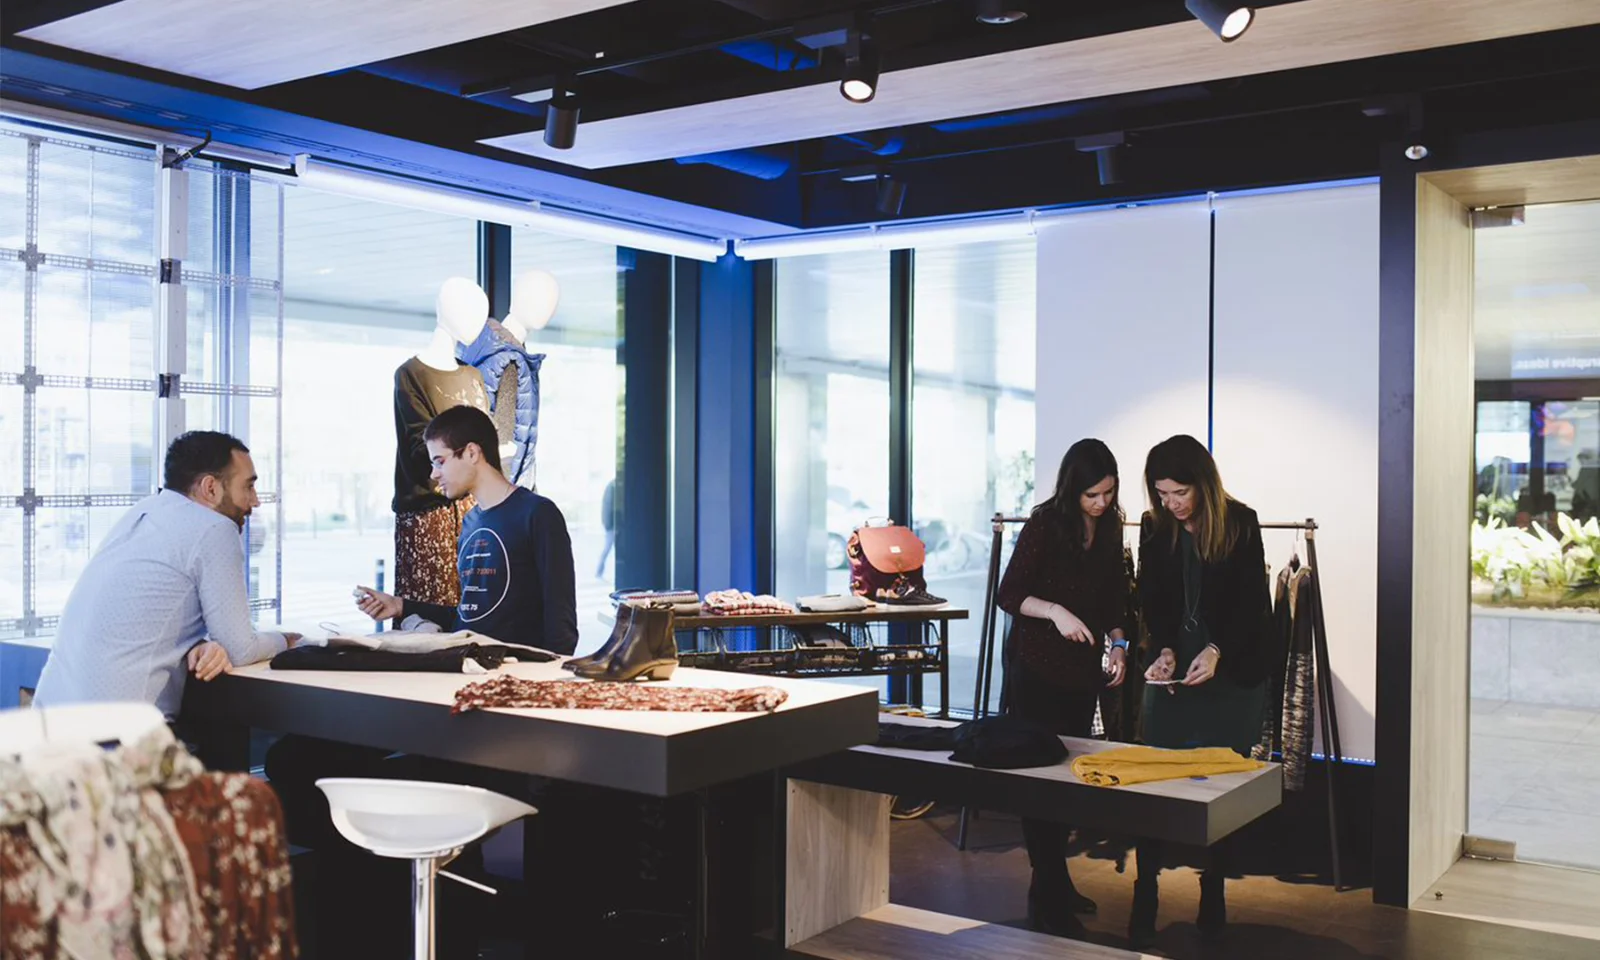 This image captures the dynamic environment of an innovation lab retail shop. Several individuals are seen engaging in collaborative activities, exploring retail technology and solutions. The setting features mannequins displaying fashionable clothing, modern retail fixtures, and various pieces of apparel laid out on tables. The bright, well-lit space with large windows fosters a creative and innovative atmosphere, ideal for brainstorming and testing new retail concepts.